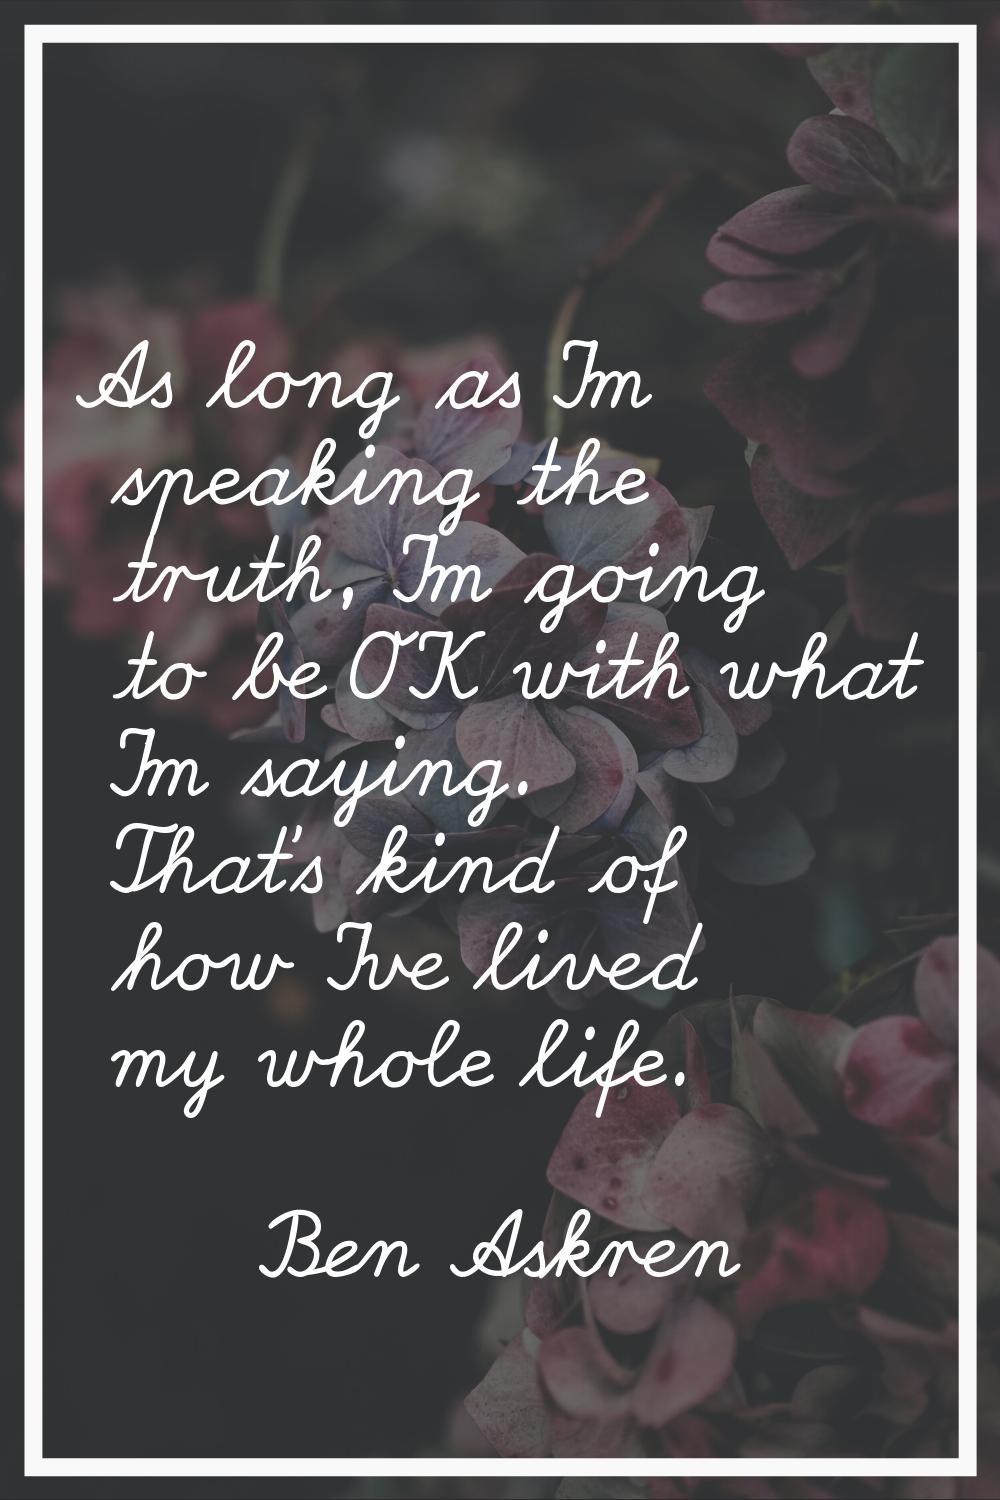 As long as I'm speaking the truth, I'm going to be OK with what I'm saying. That's kind of how I've